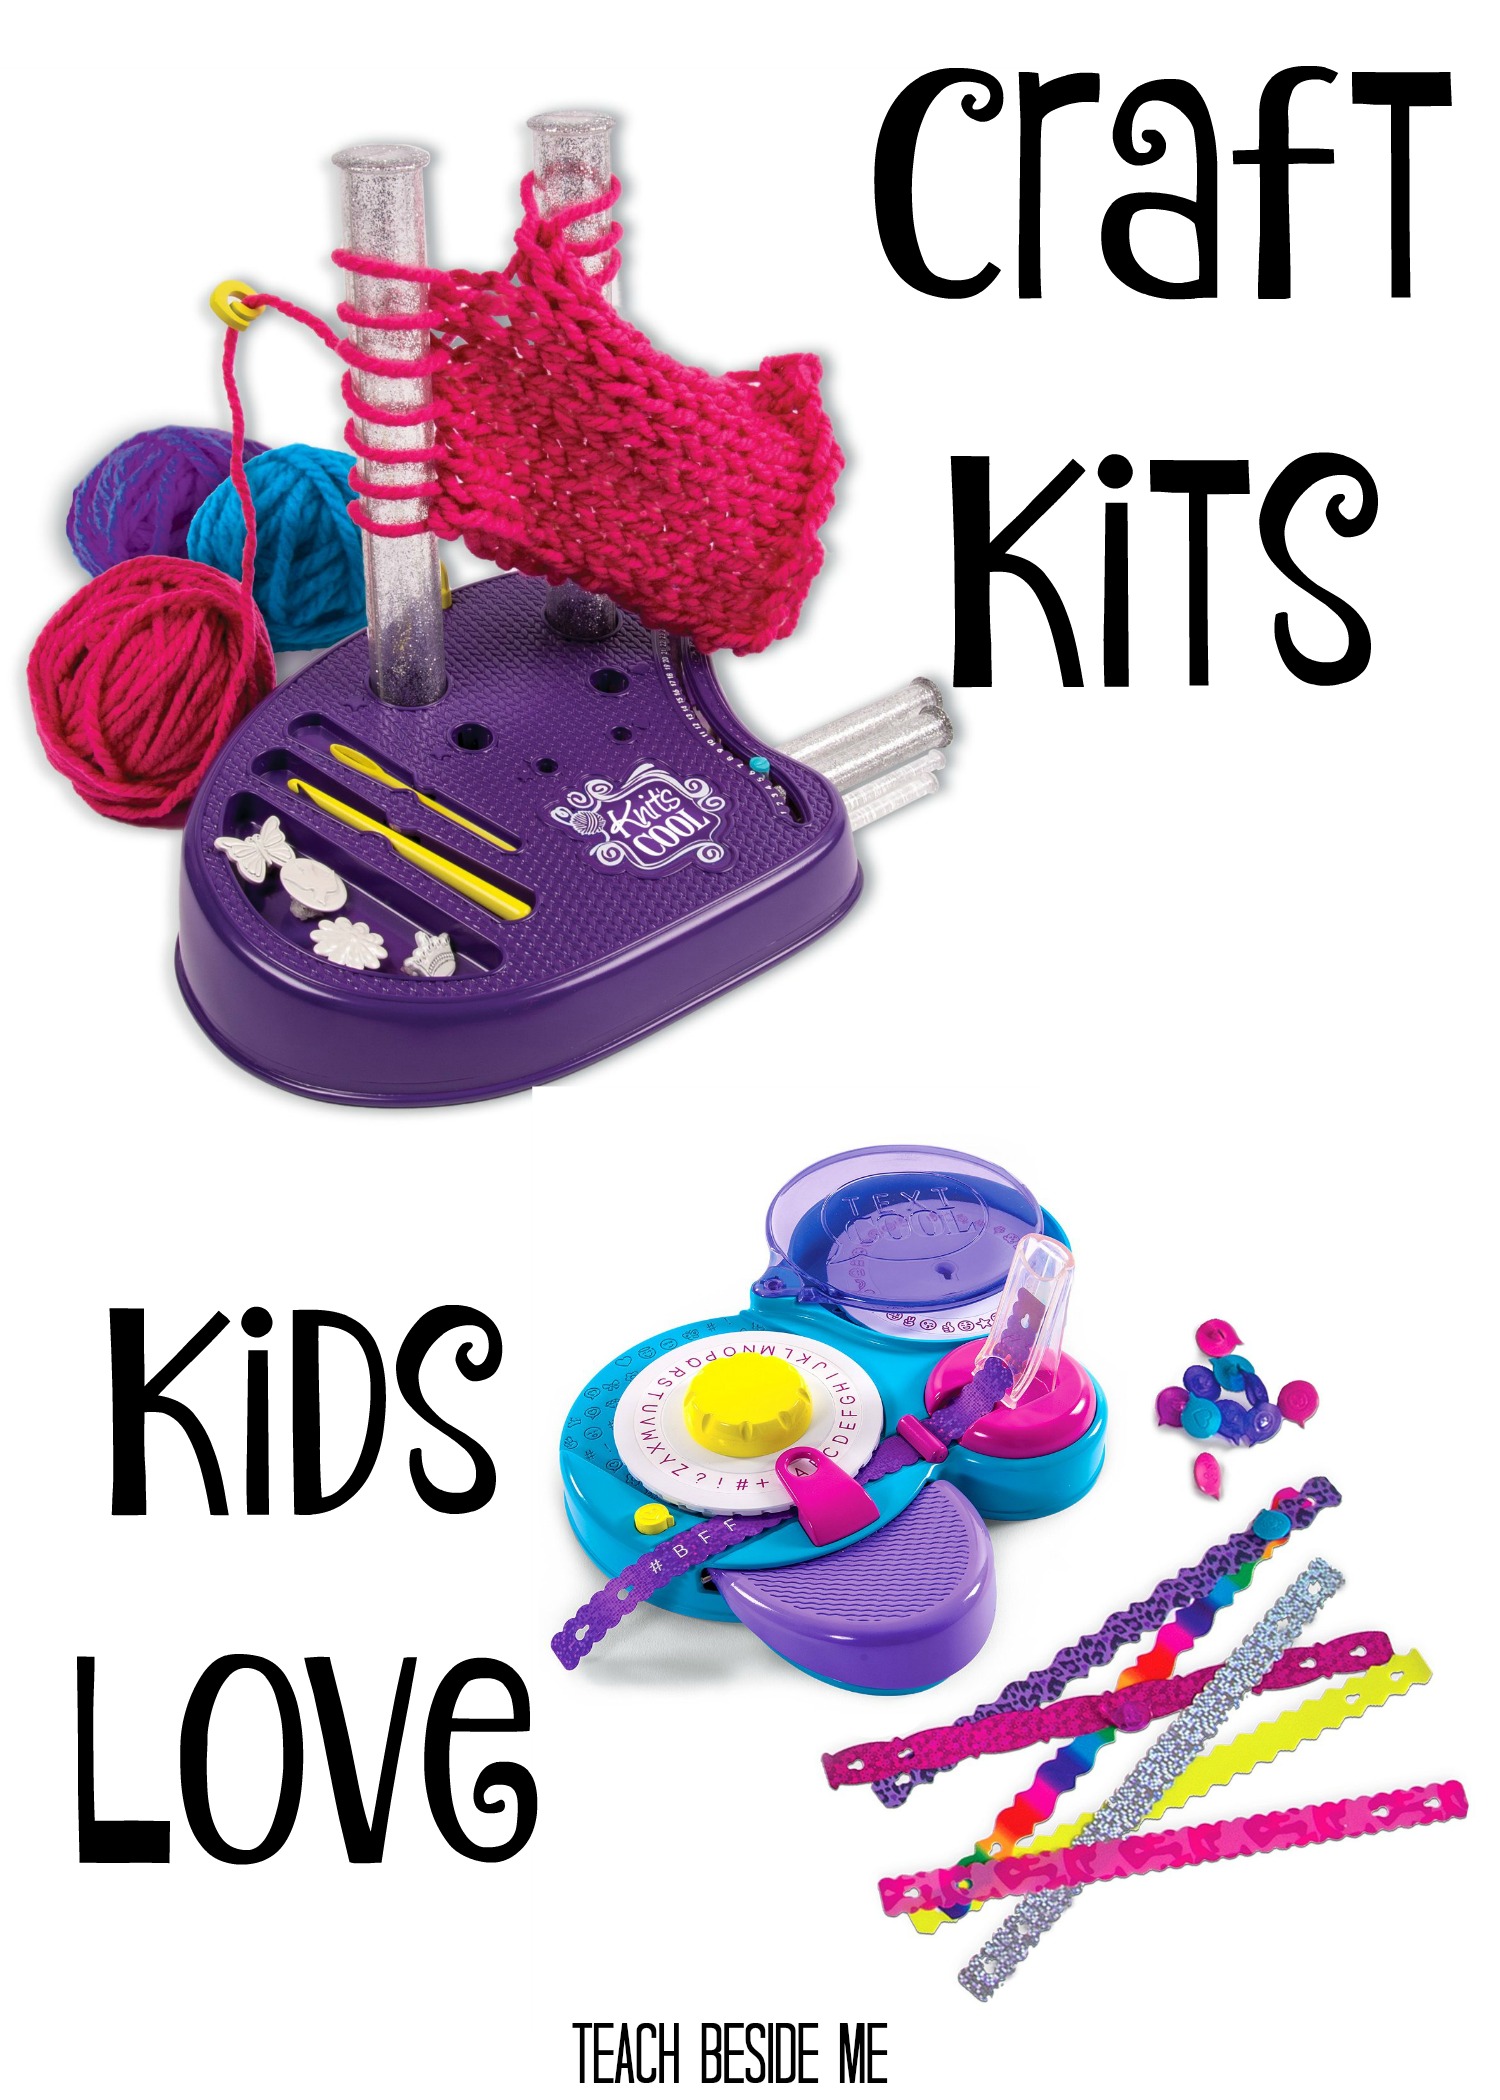 Cool Craft Kits for Kids - Teach Beside Me